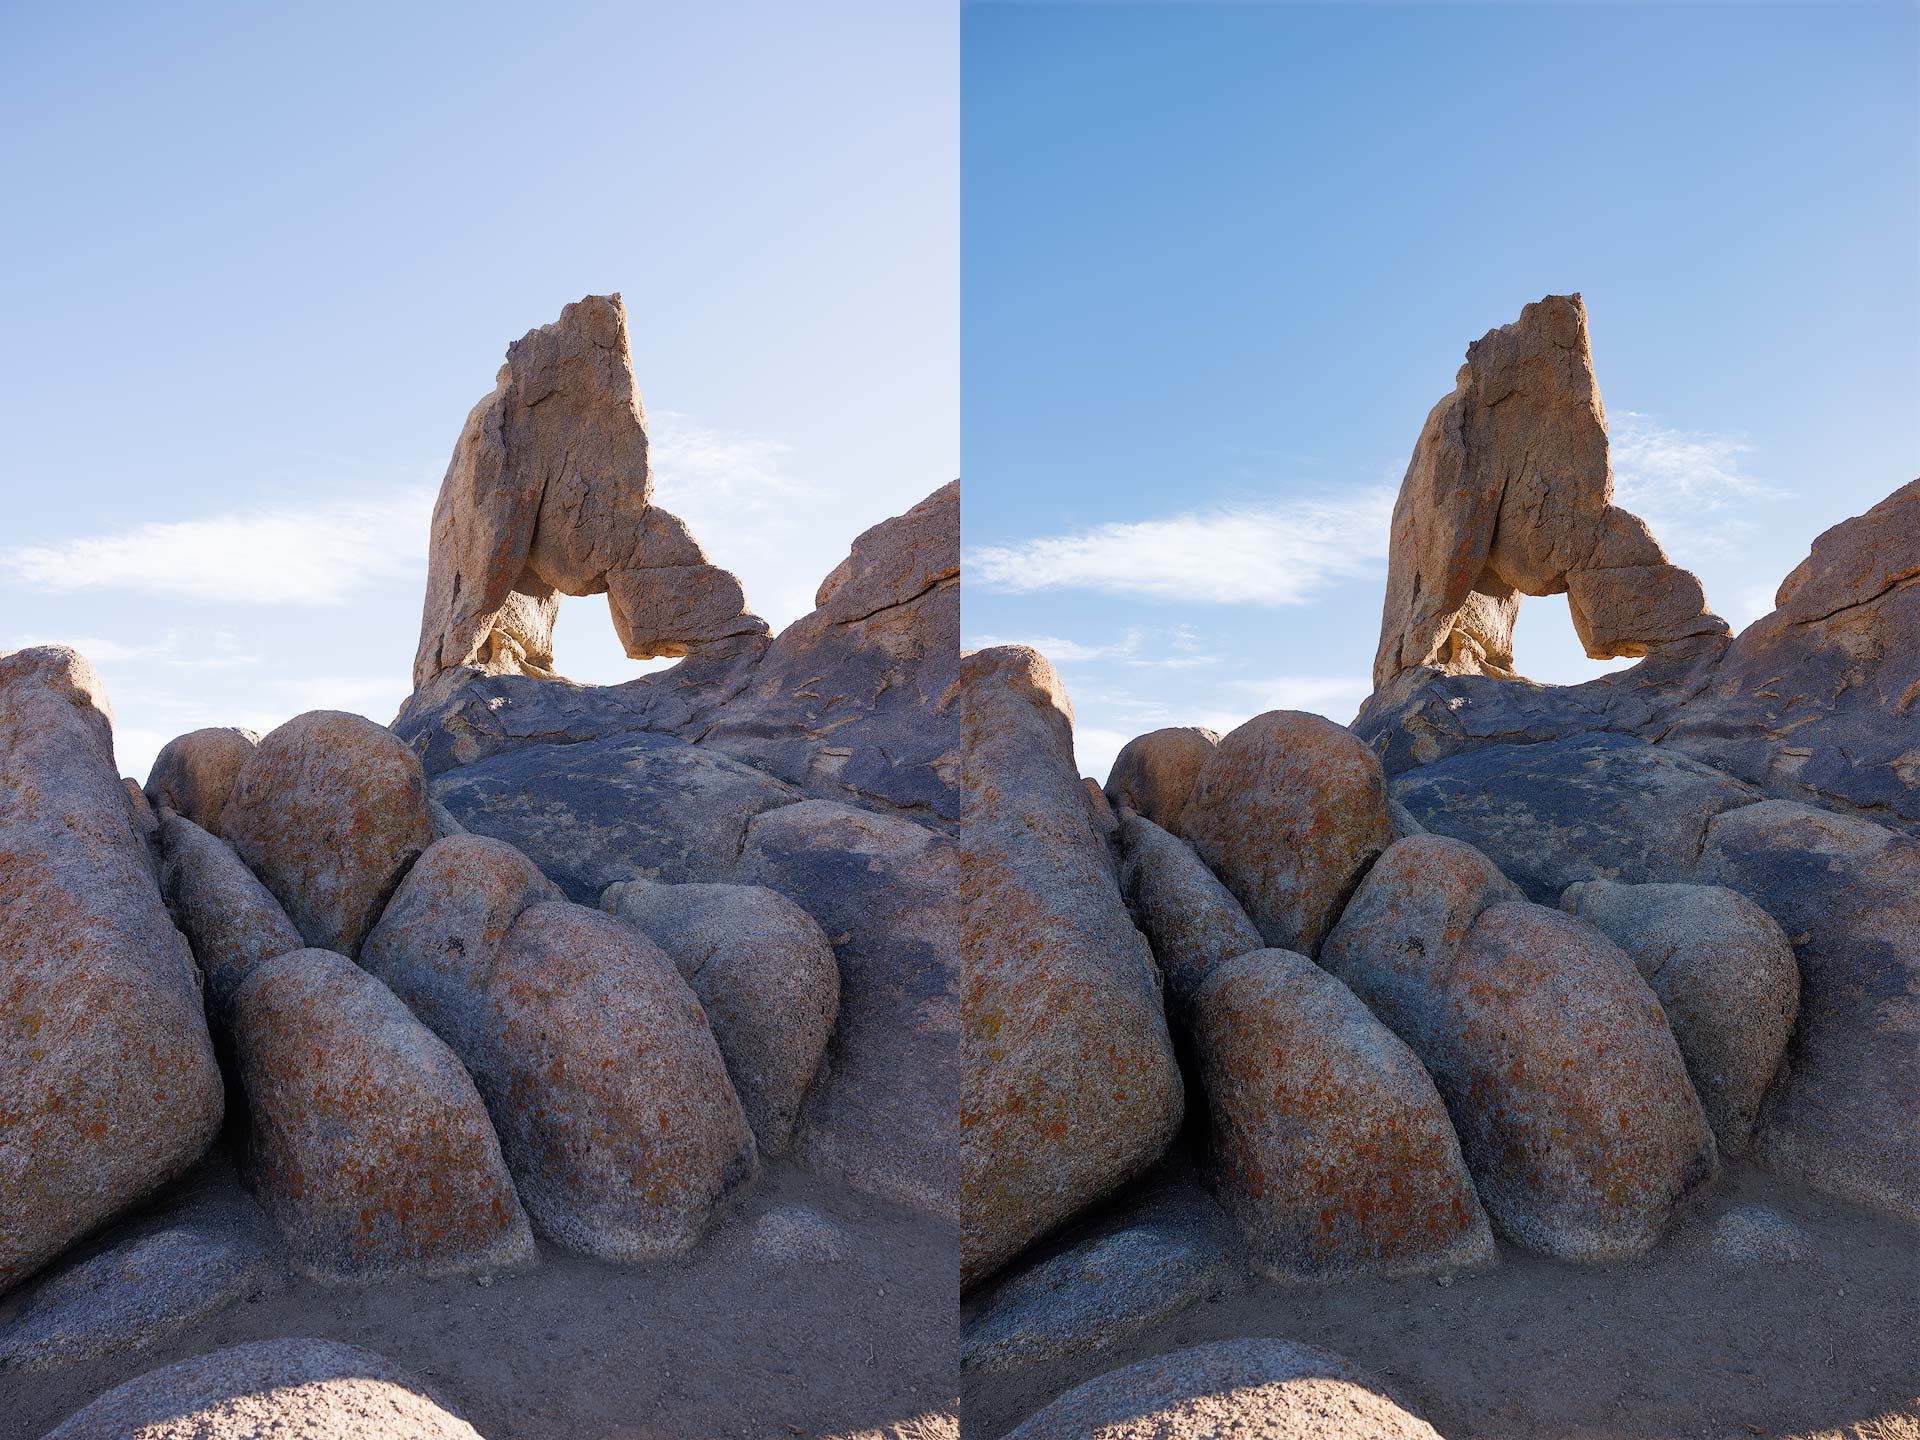 Before and after using Adjust Lighting tool in Topaz Labs Photo AI